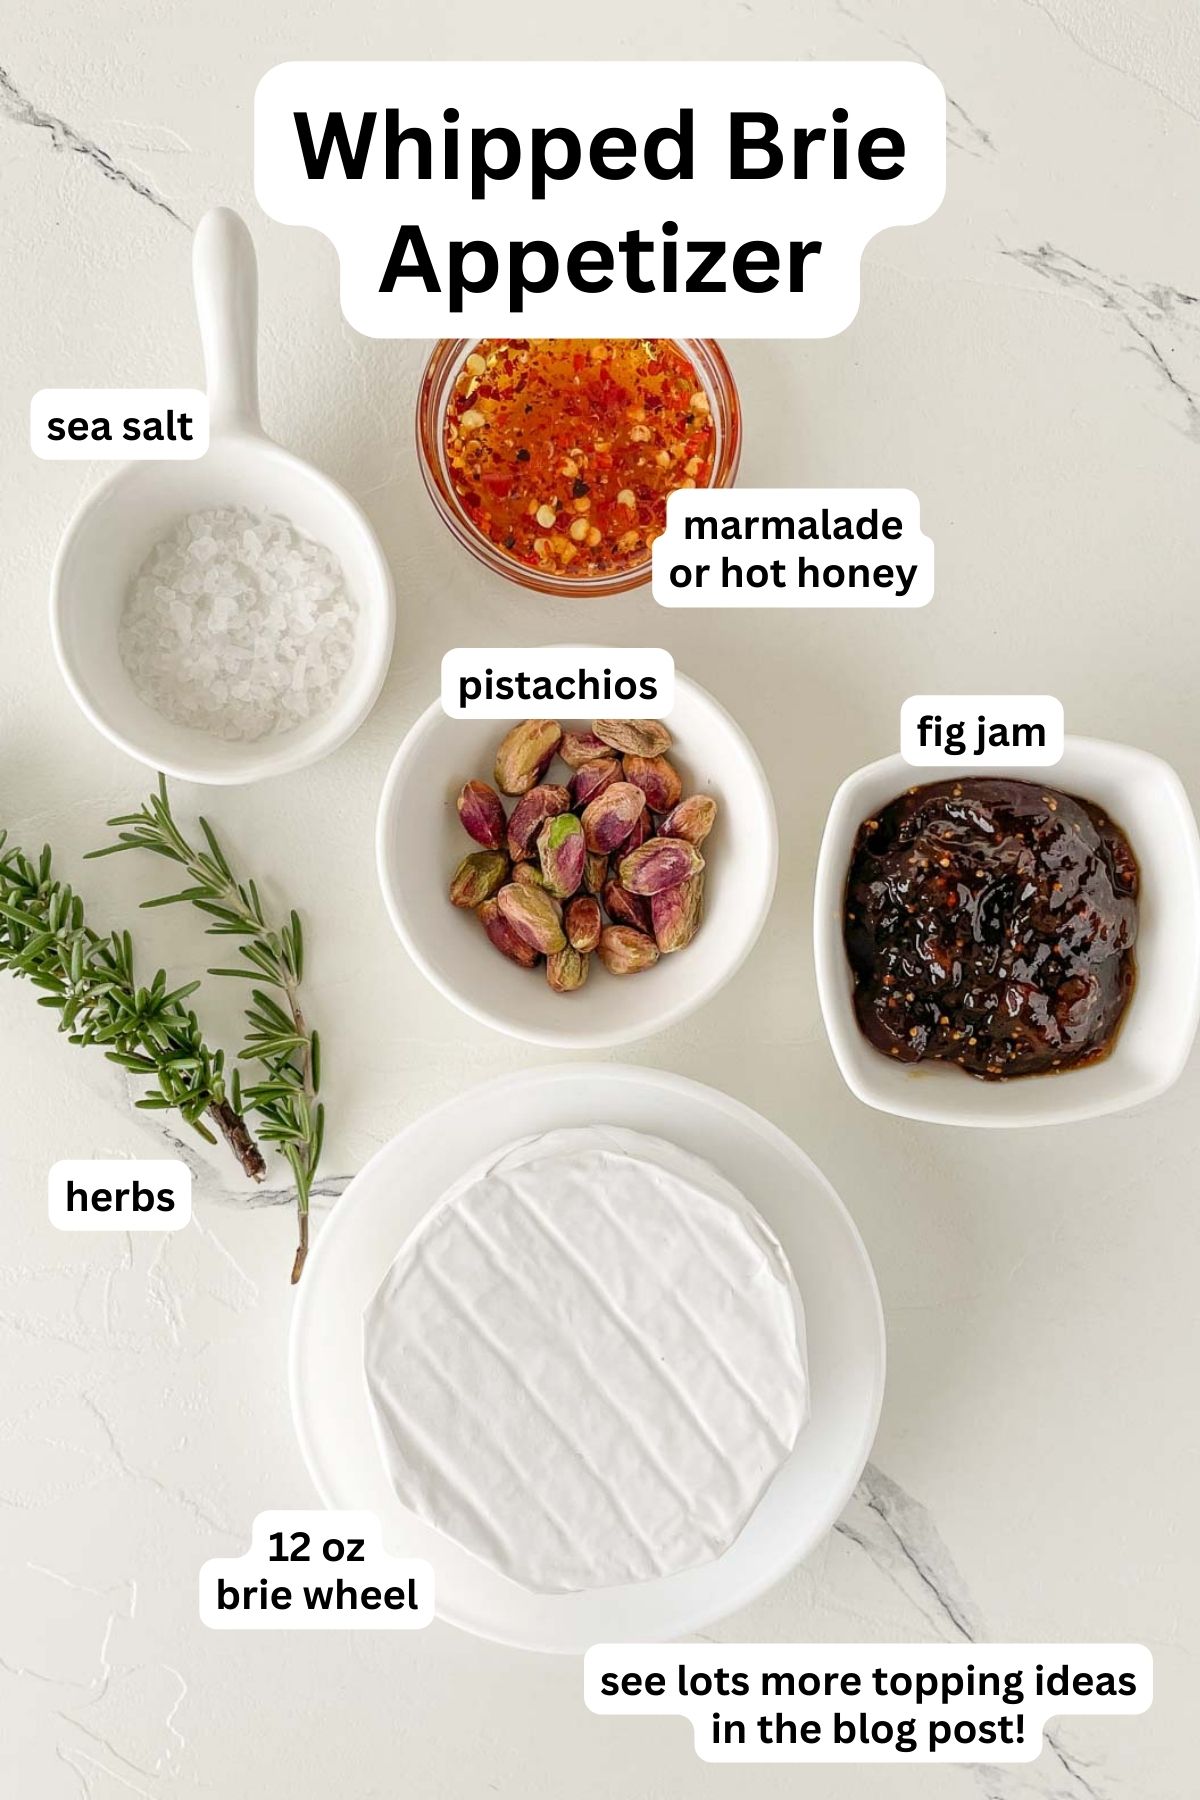 Ingredients to make whipped brie with toppings